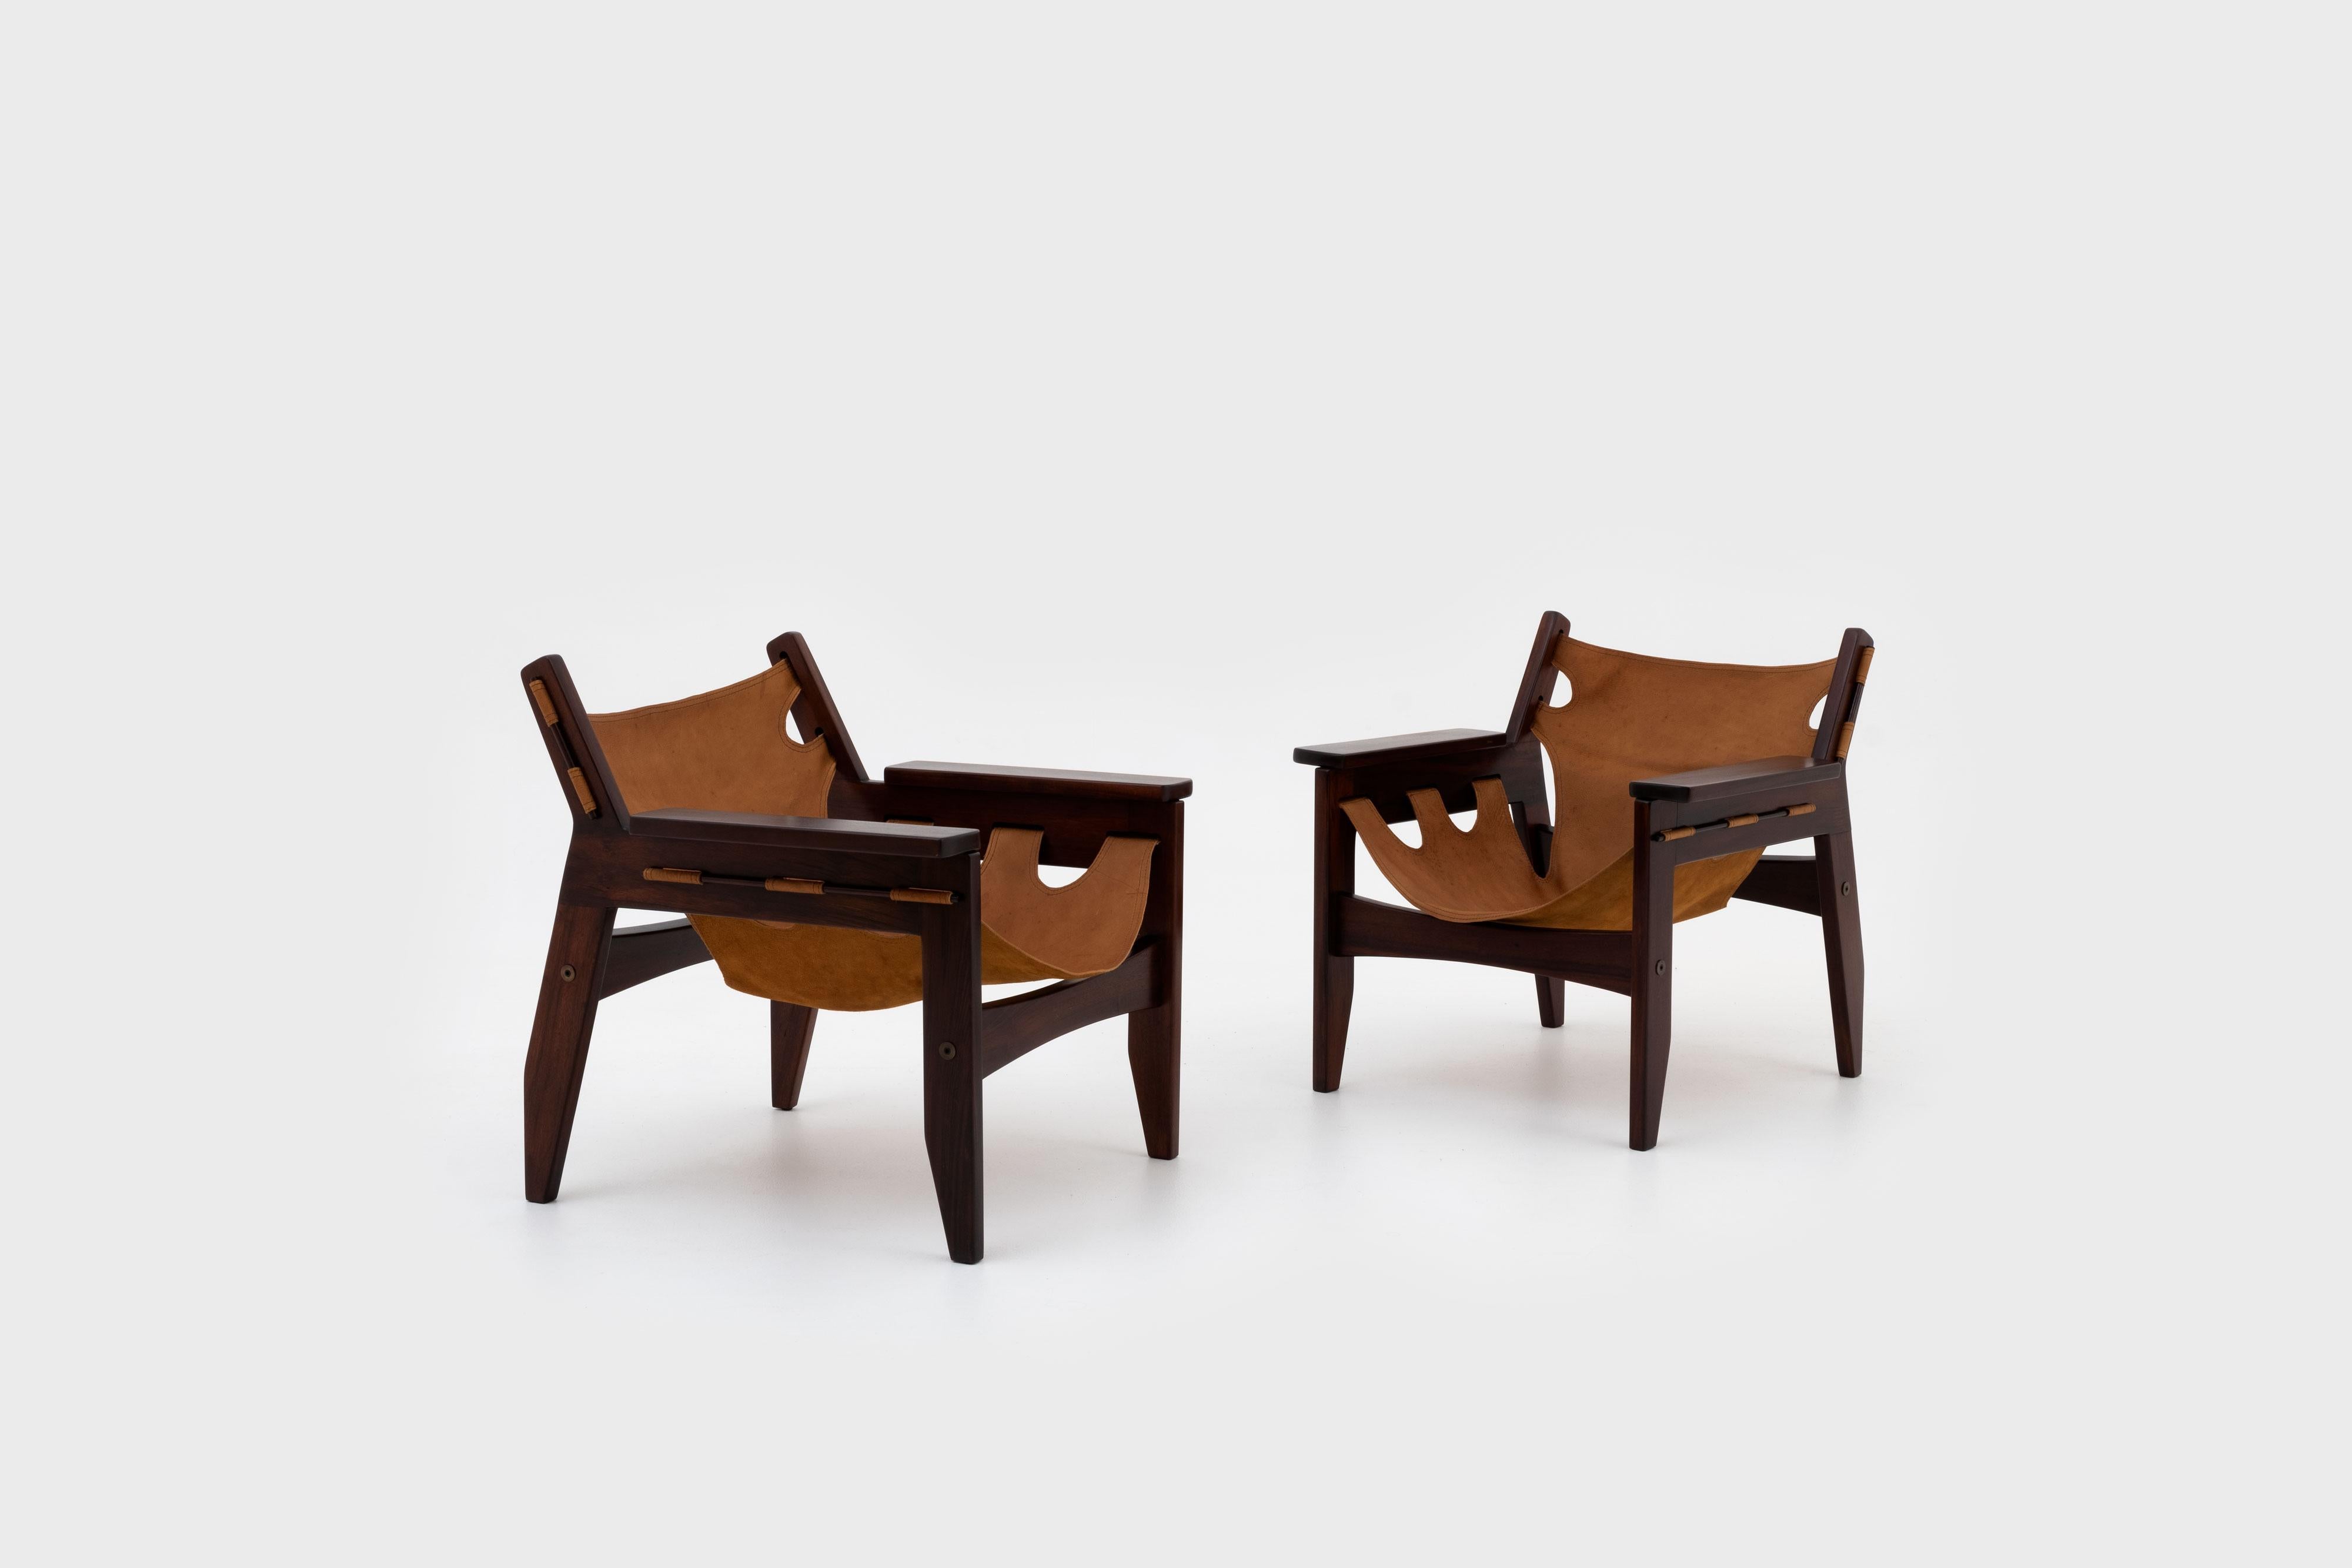 Beautiful pair of 'Kilin' lounge chairs by Sergio Rodrigues for Oca, Brazil 1973.
Distinctive design out of solid Rosewood and natural Ocre colored leather with a beautiful patina. Very elegant and comfortable armchairs in excellent condition.
 